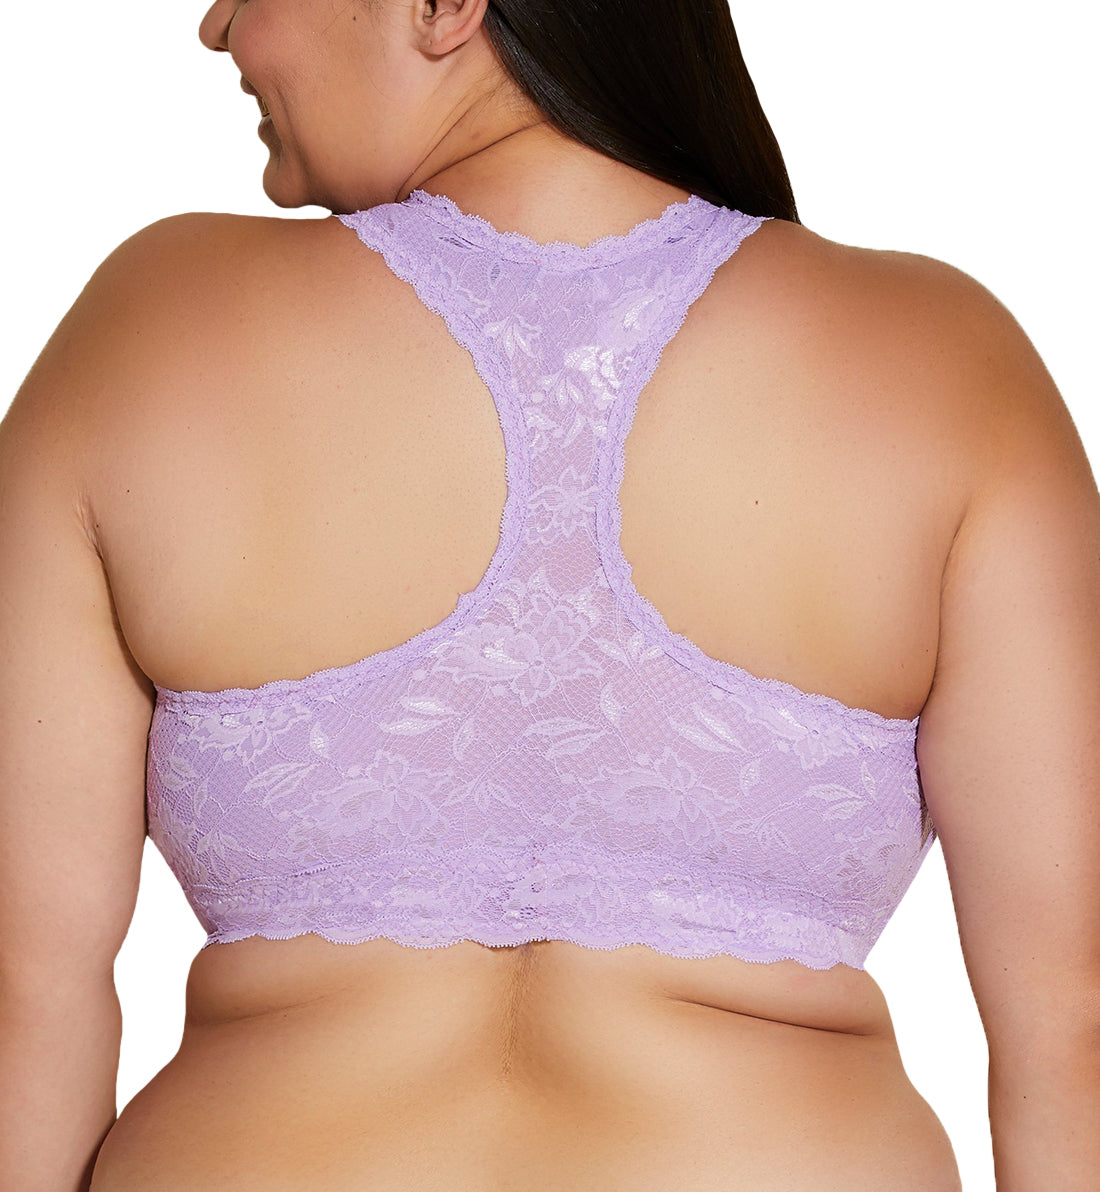 Cosabella Never Say Never Ultra CURVY Racie Racerback Bralette (NEVER1353),XS,Icy Violet - Icy Violet,XS